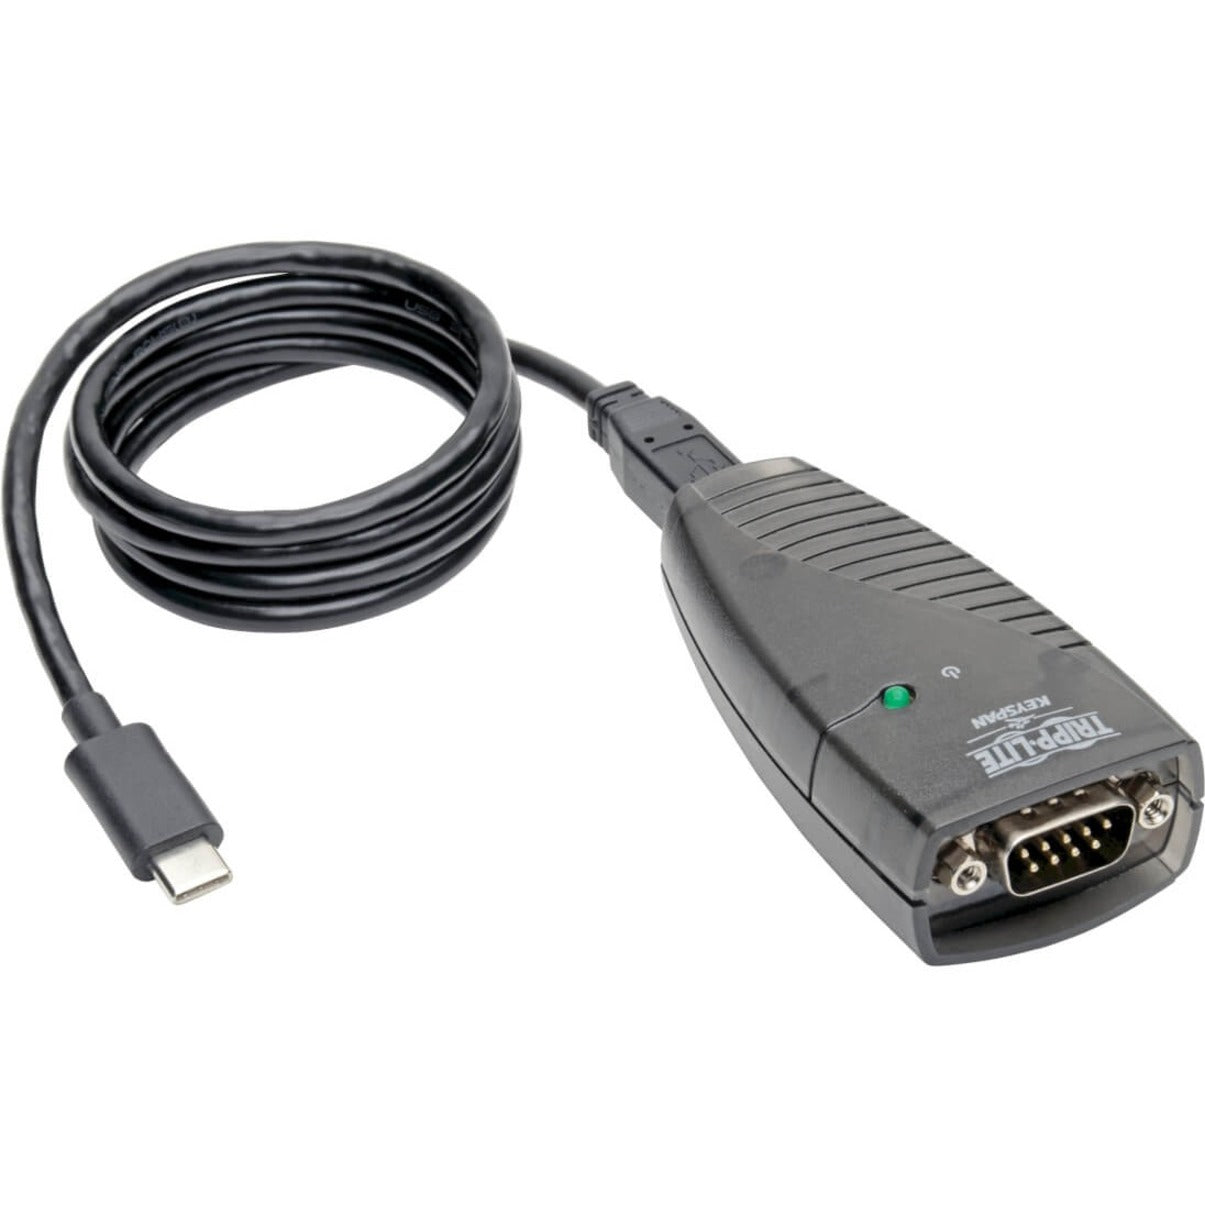 Tripp Lite USA-19HS-C USB-C to Serial Adapter (DB9), High-Speed, Detachable Cable, TAA